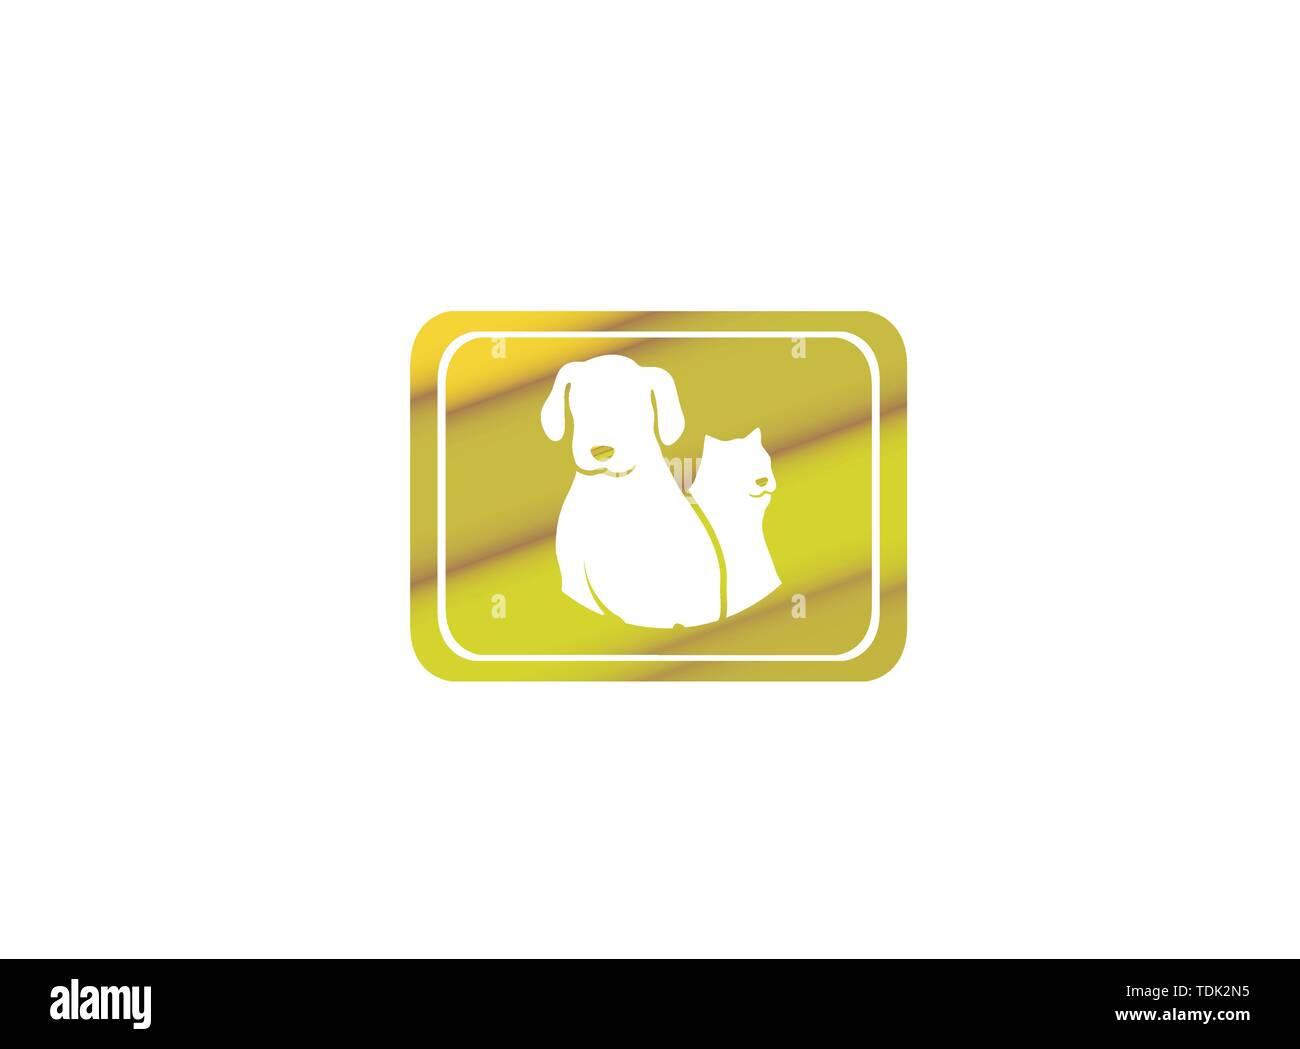 Dog beside cat a friendly pet family logo design illustration in a shape icon Stock Vector